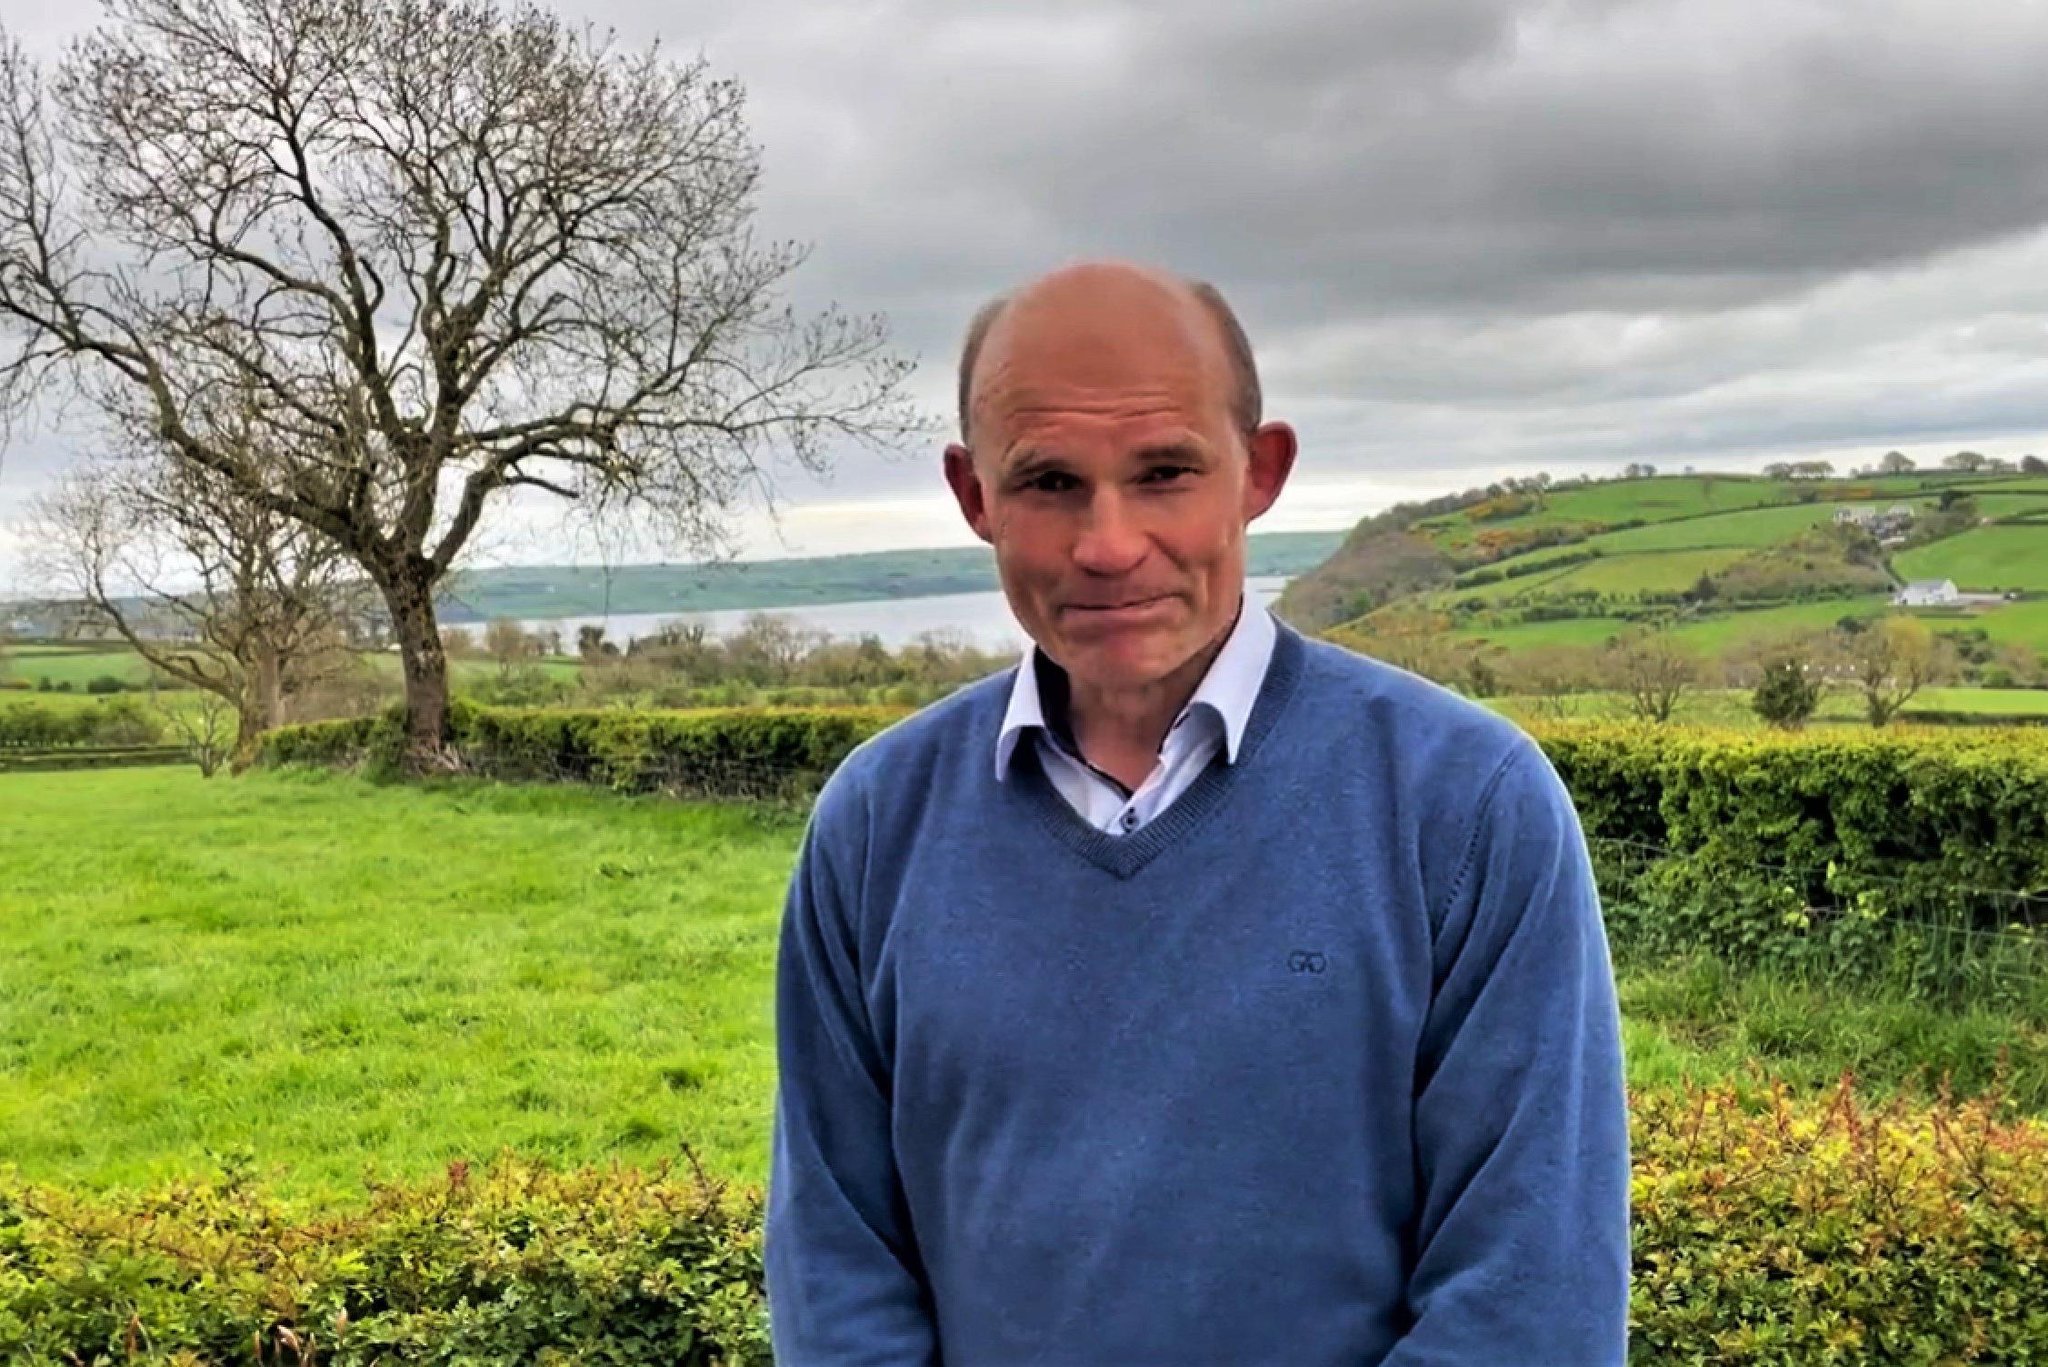 ELECTION 2022: East Antrim – The Beggs dynasty comes crashing down after four decades... but colleague touts a comeback